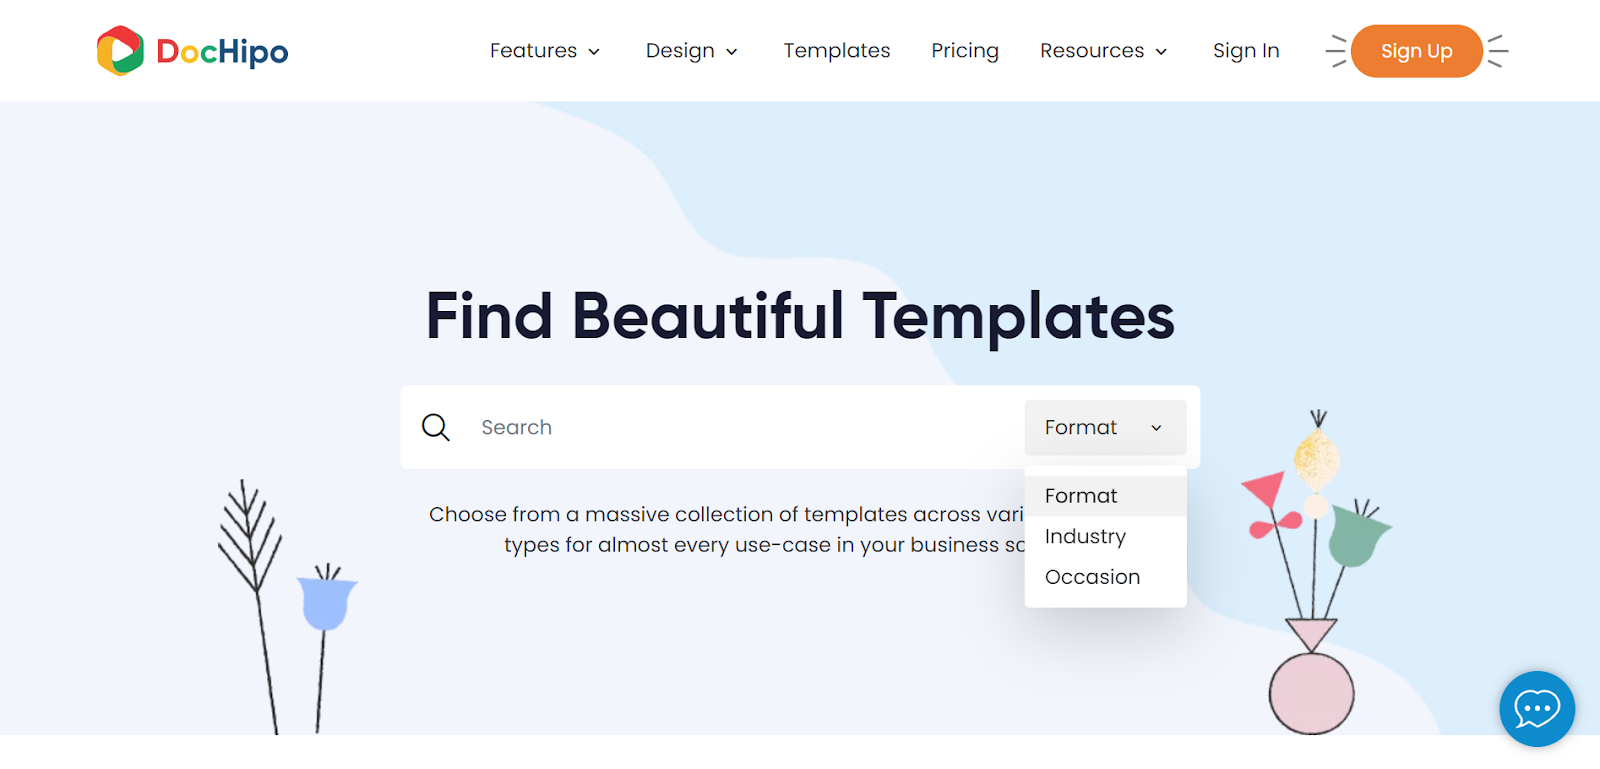 DocHipo’s Templates Page